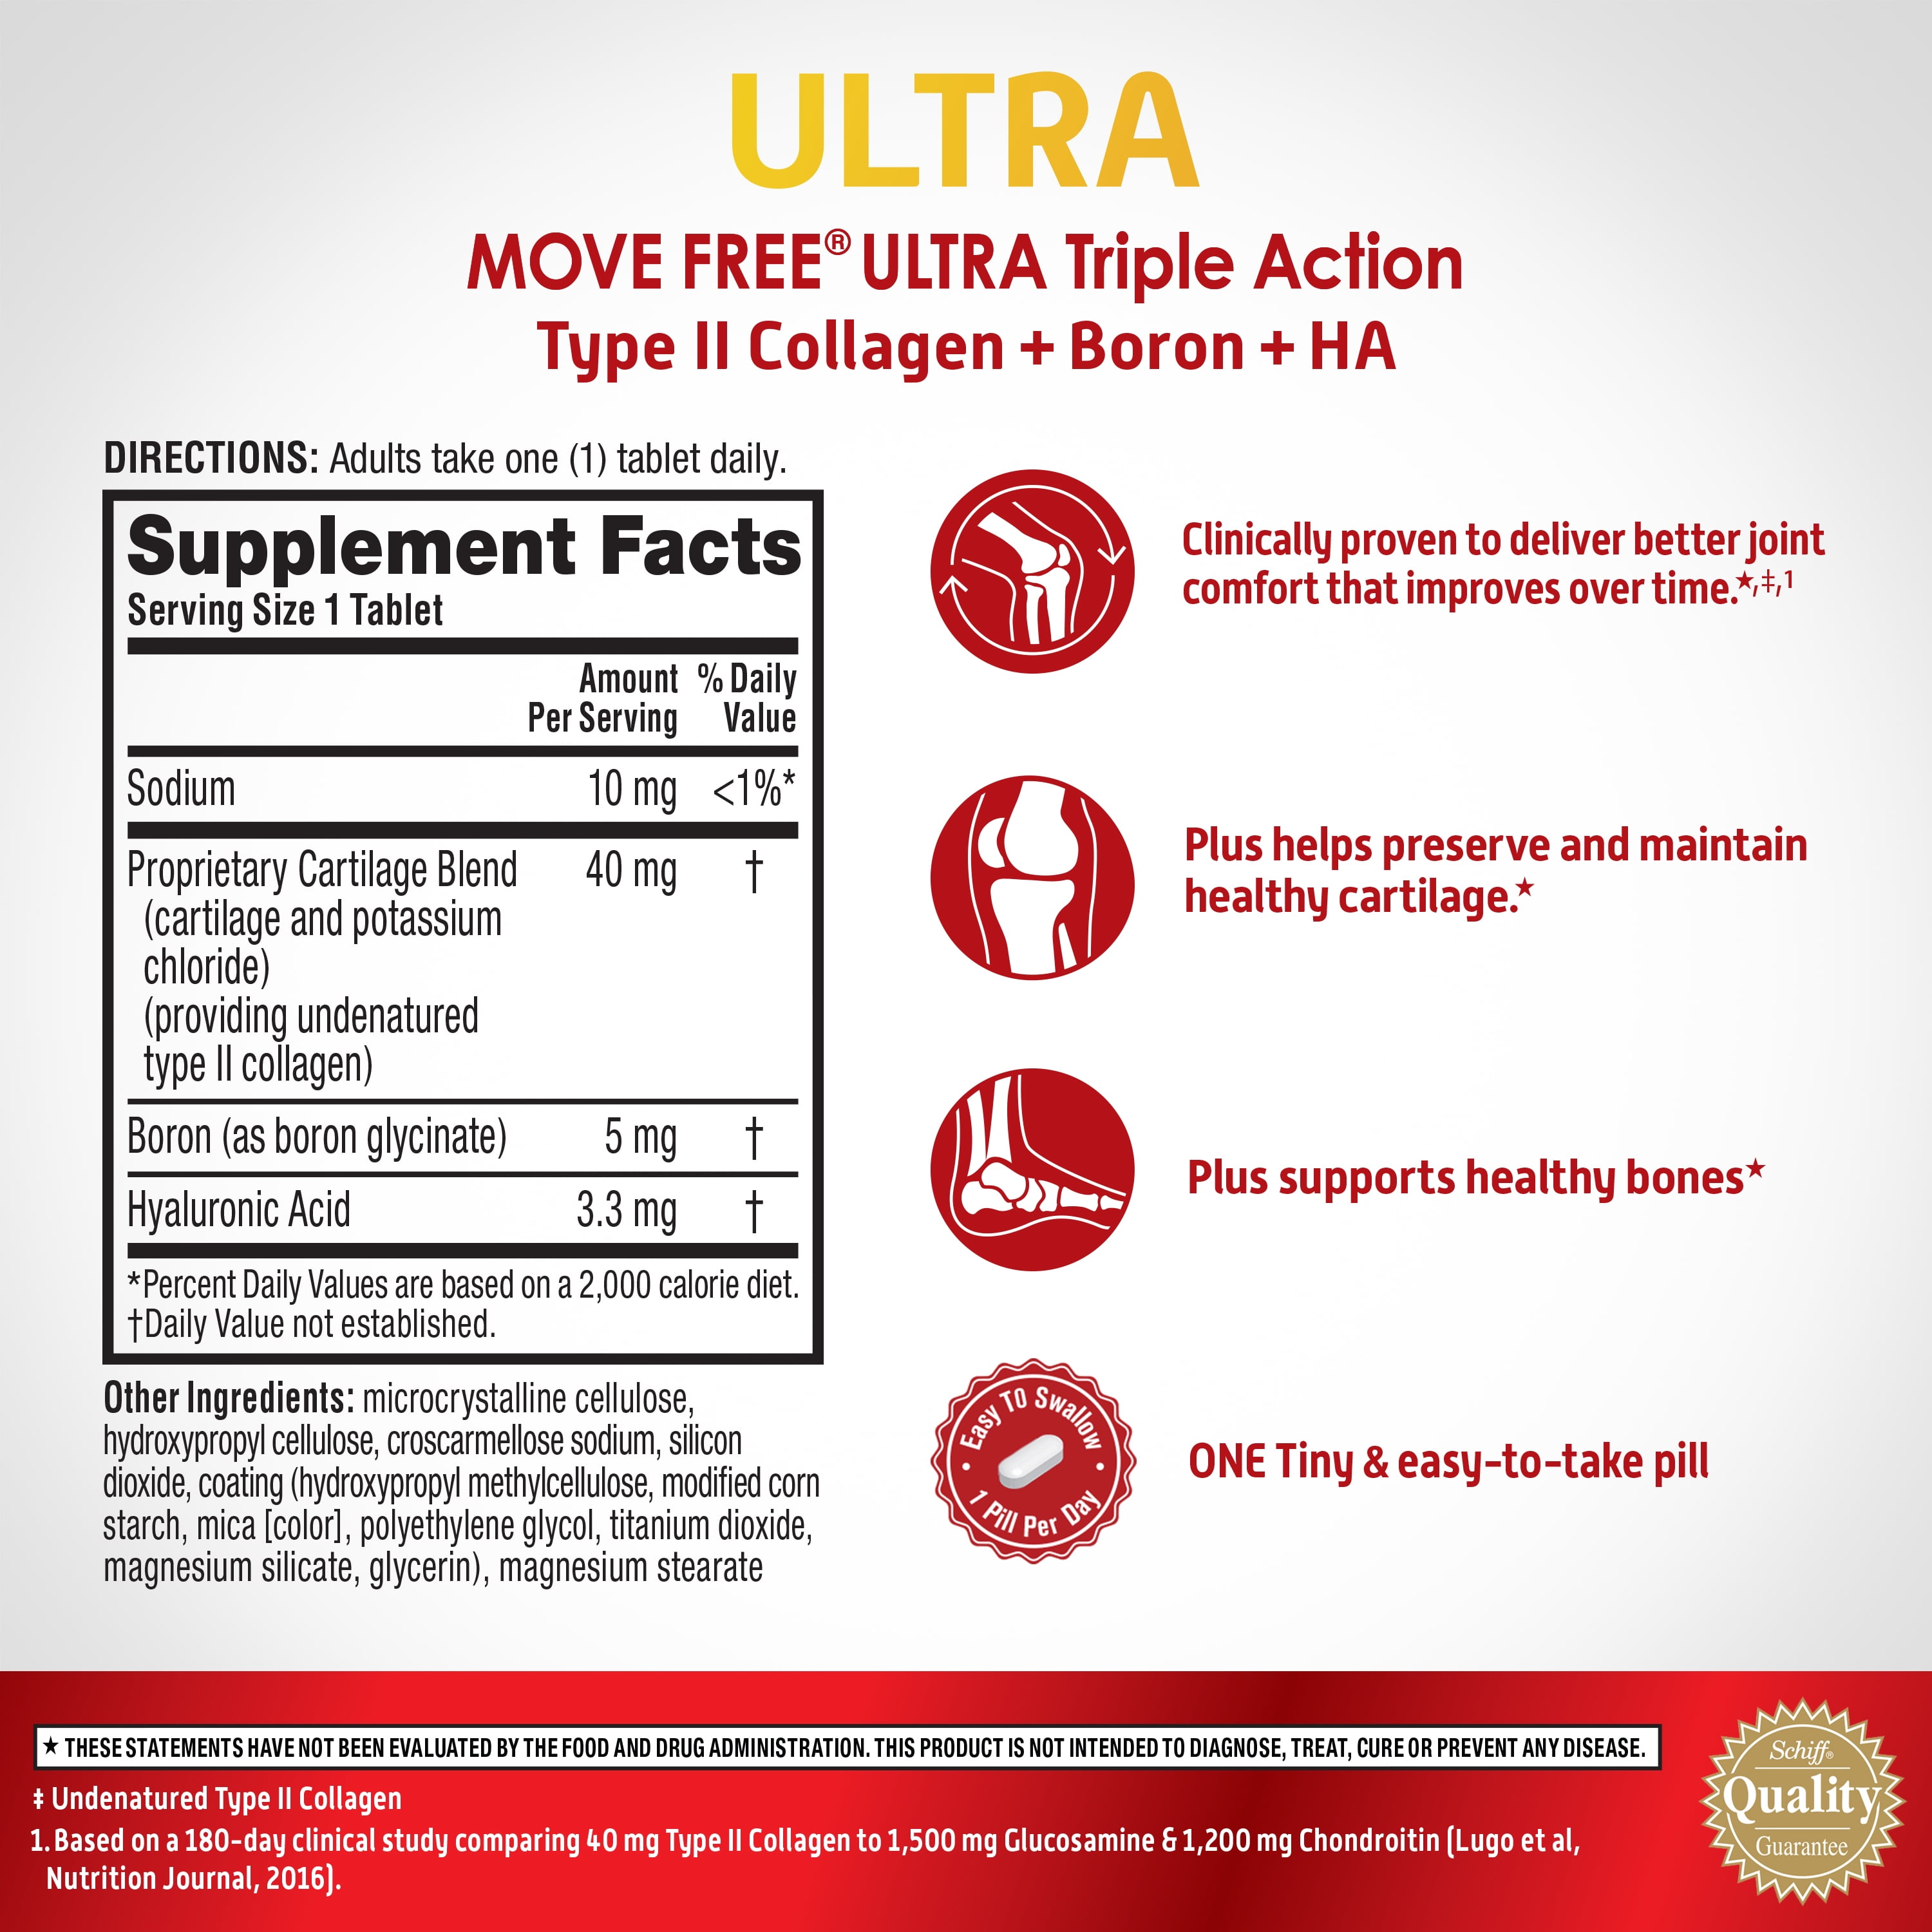 Move Free Ultra Triple Action Joint Support Supplement - Type II Collagen  Boron & Hyaluronic Acid - Supports Joint Comfort, Cartiliage & Bones in 1  Tiny Pill Per Day, 160 Tablets (160 servings)* 160ct Capsules